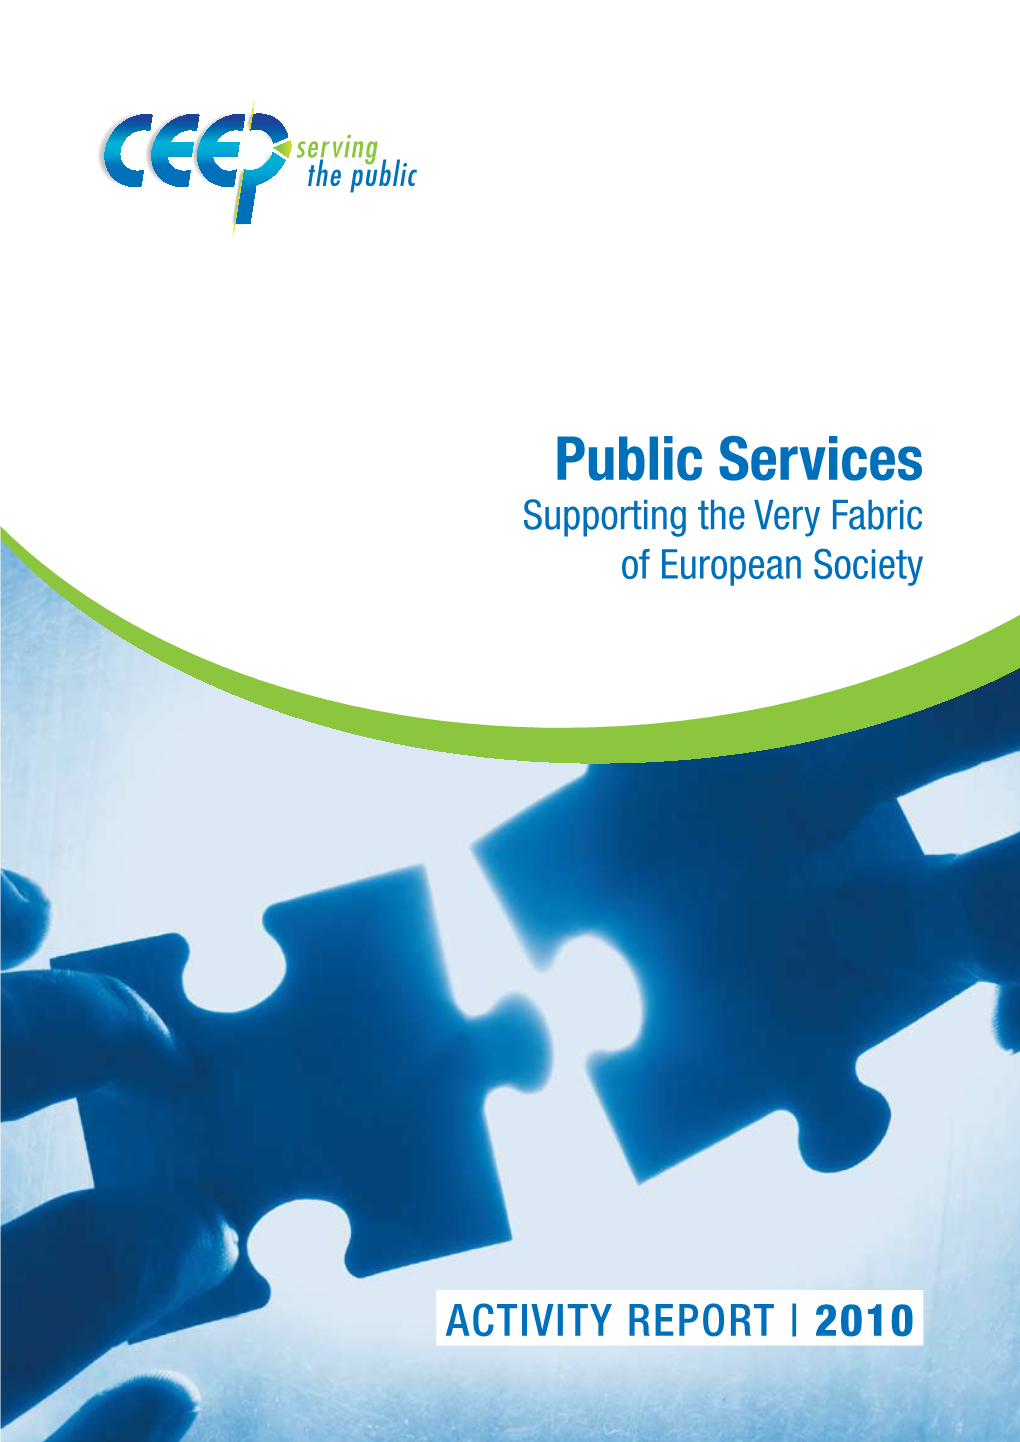 Public Services Supporting the Very Fabric of European Society